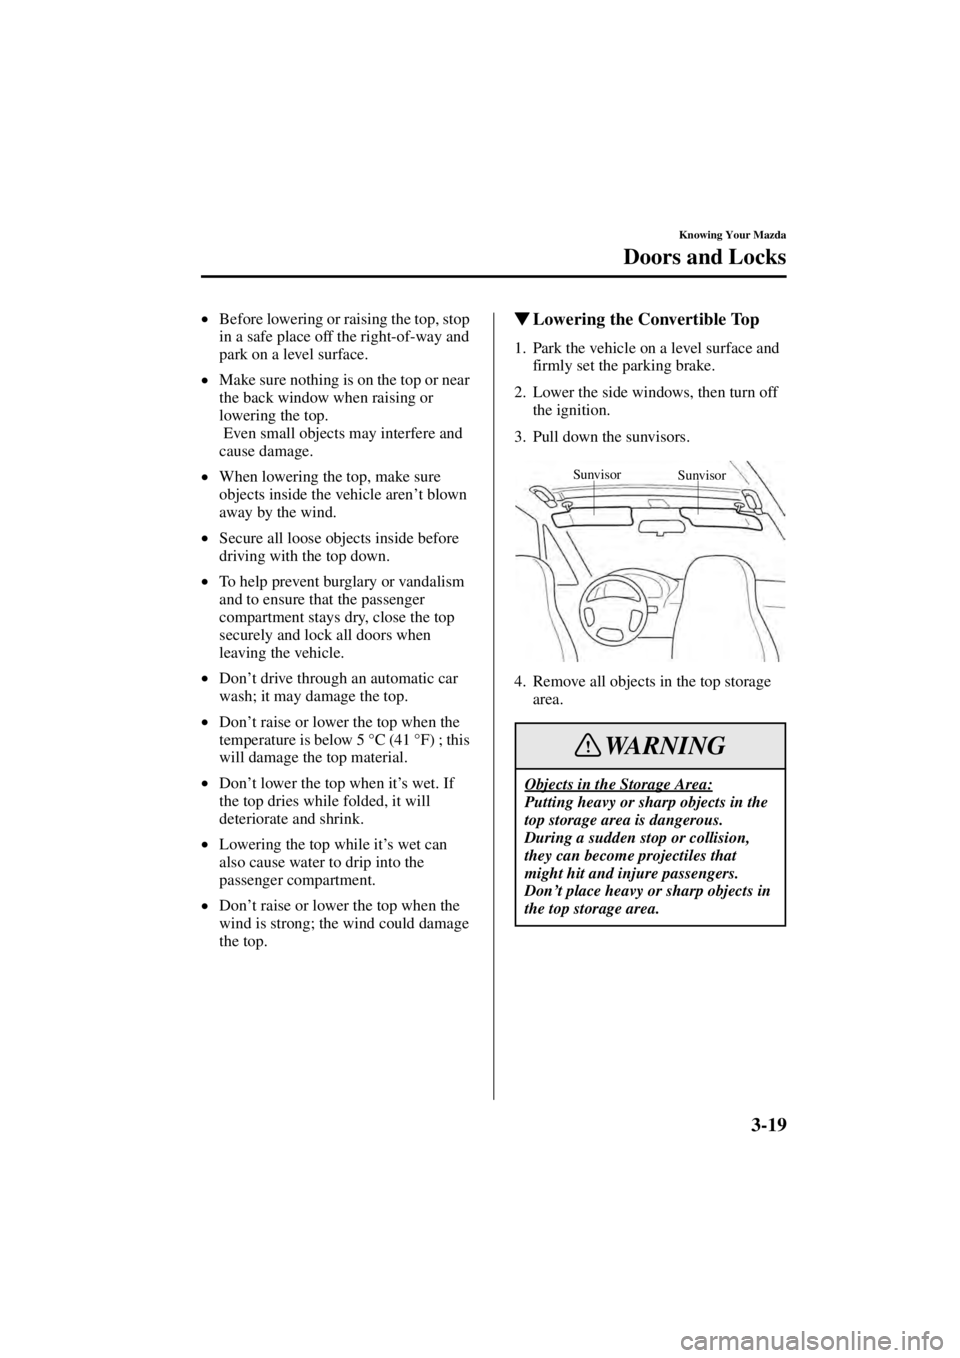 MAZDA MODEL SPEED MX-5 MIATA 2004 Workshop Manual 3-19
Knowing Your Mazda
Doors and Locks
Form No. 8T02-EA-03L
•Before lowering or raising the top, stop 
in a safe place off the right-of-way and 
park on a level surface.
• Make sure nothing is on